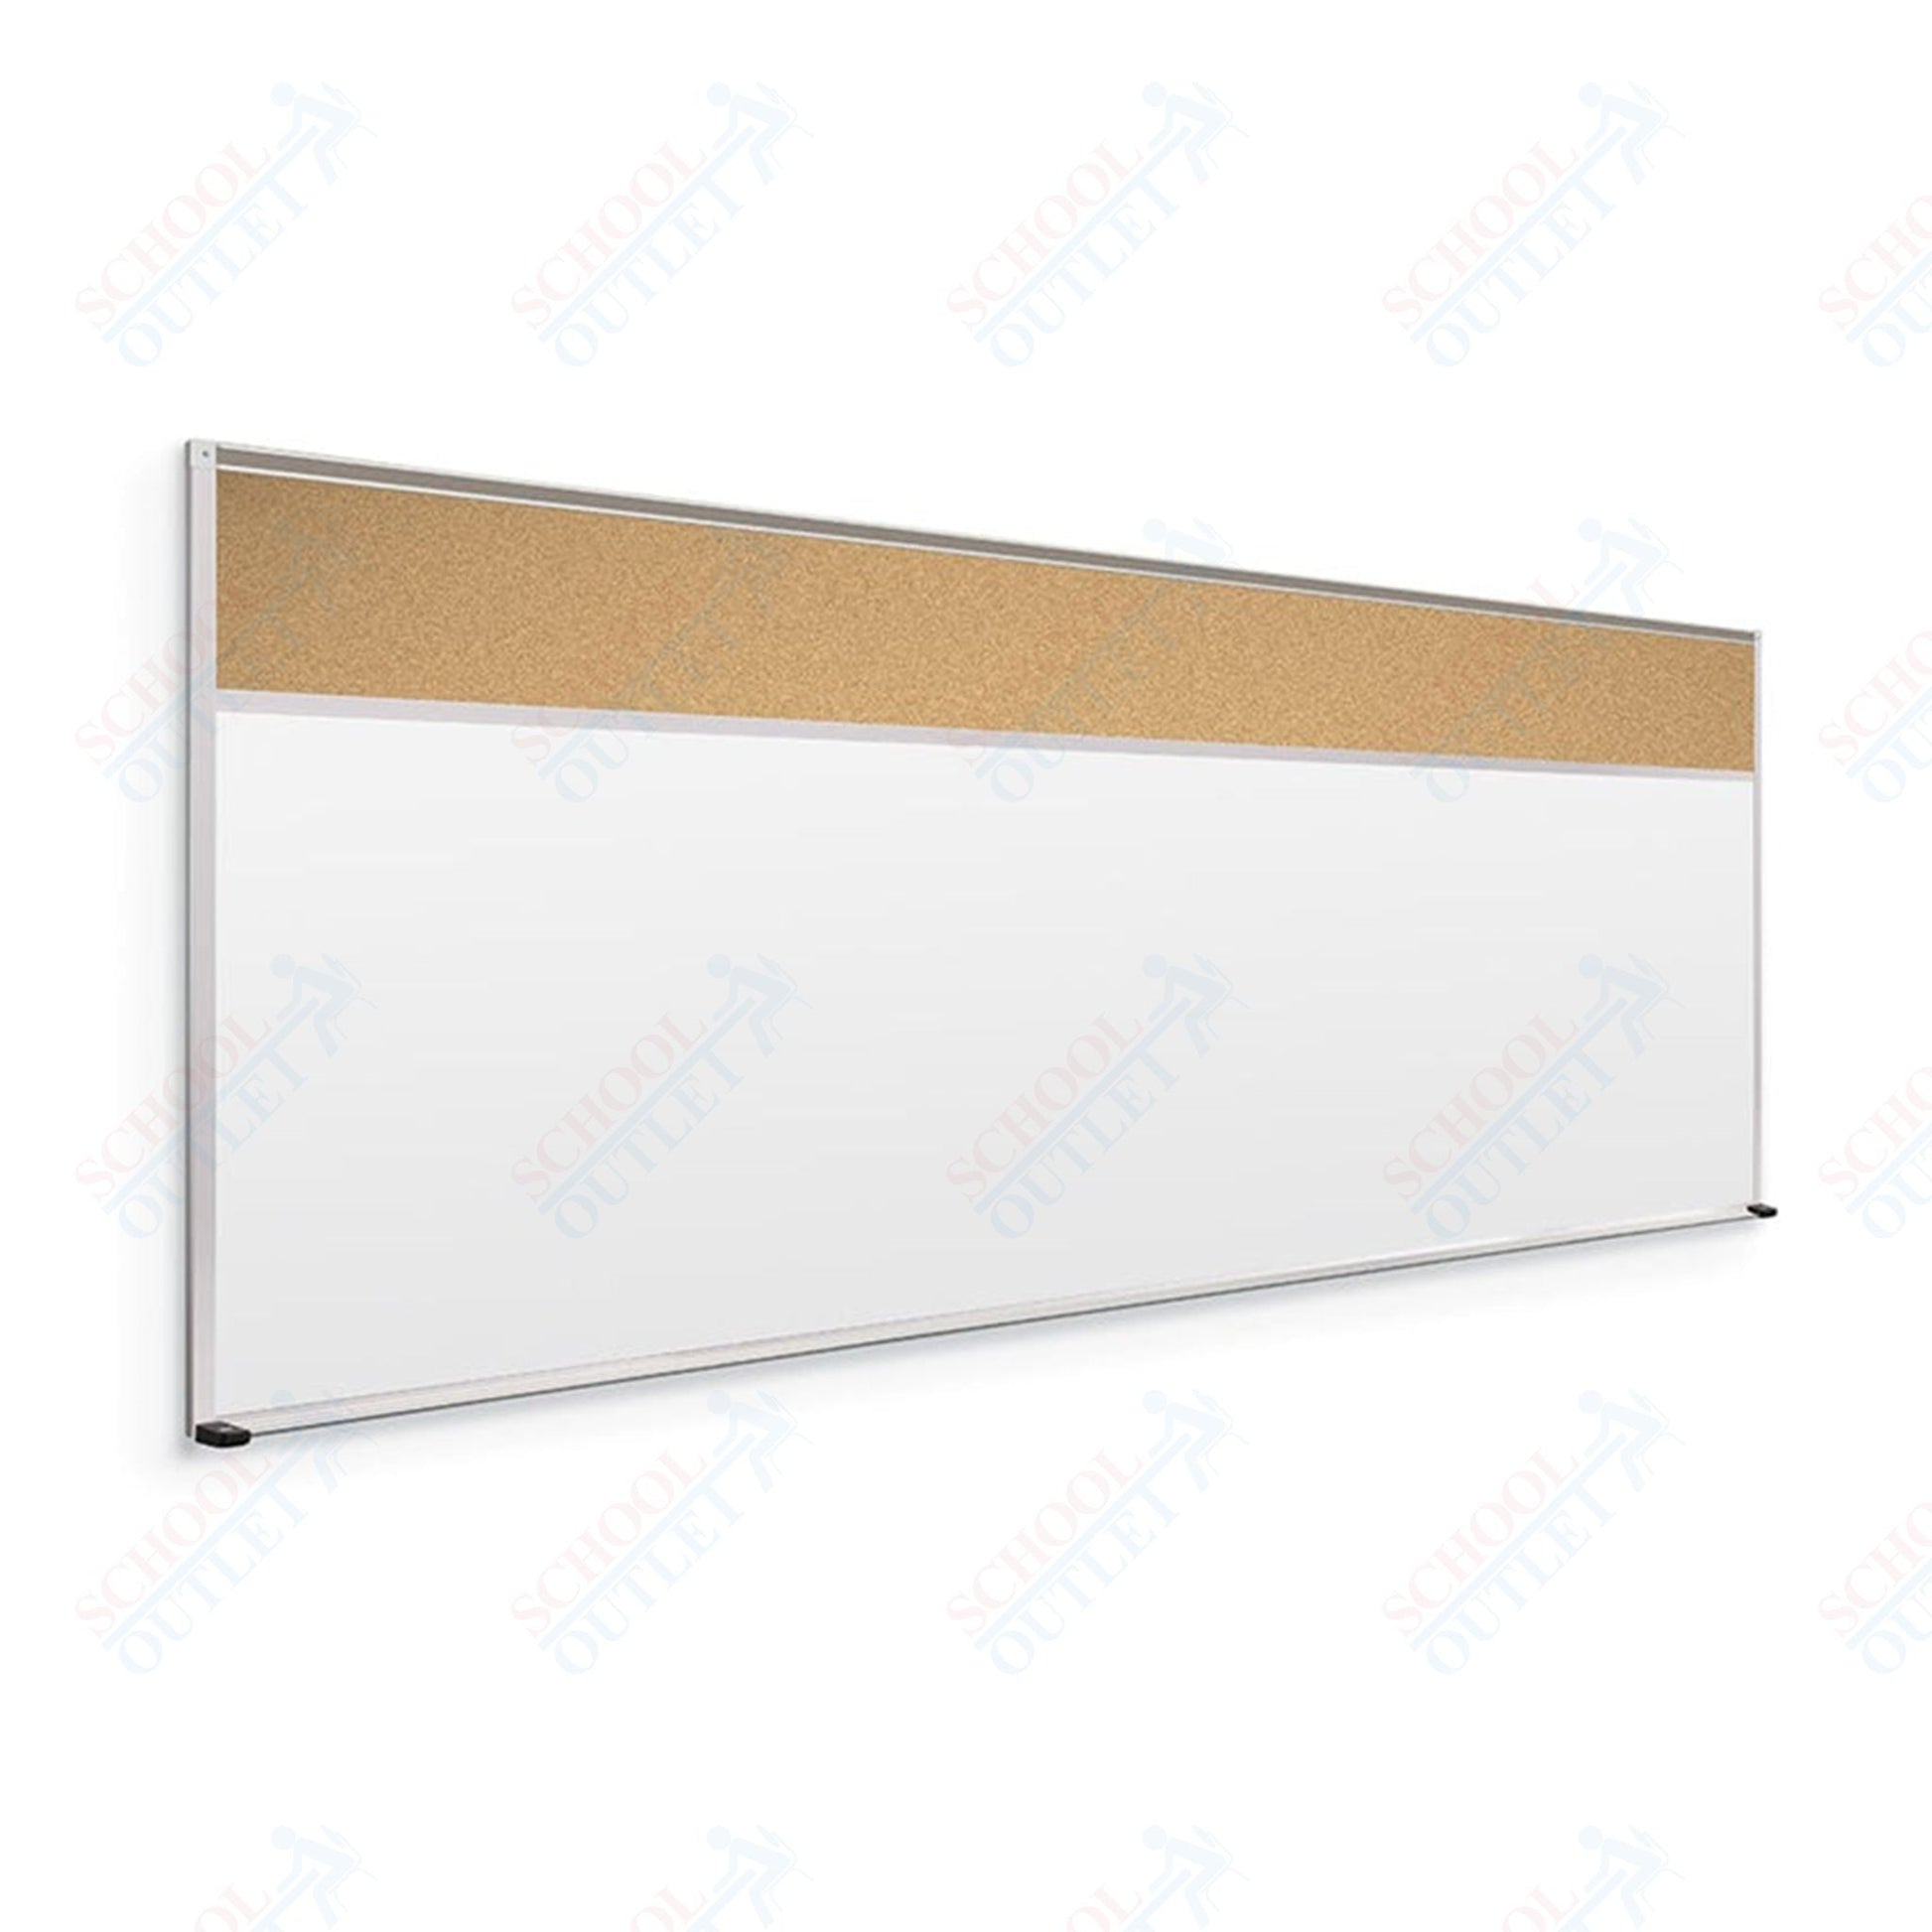 Mooreco Combination Board - Porcelain Steel Markerboard and Natural Cork Tackboard (Type E) - SchoolOutlet